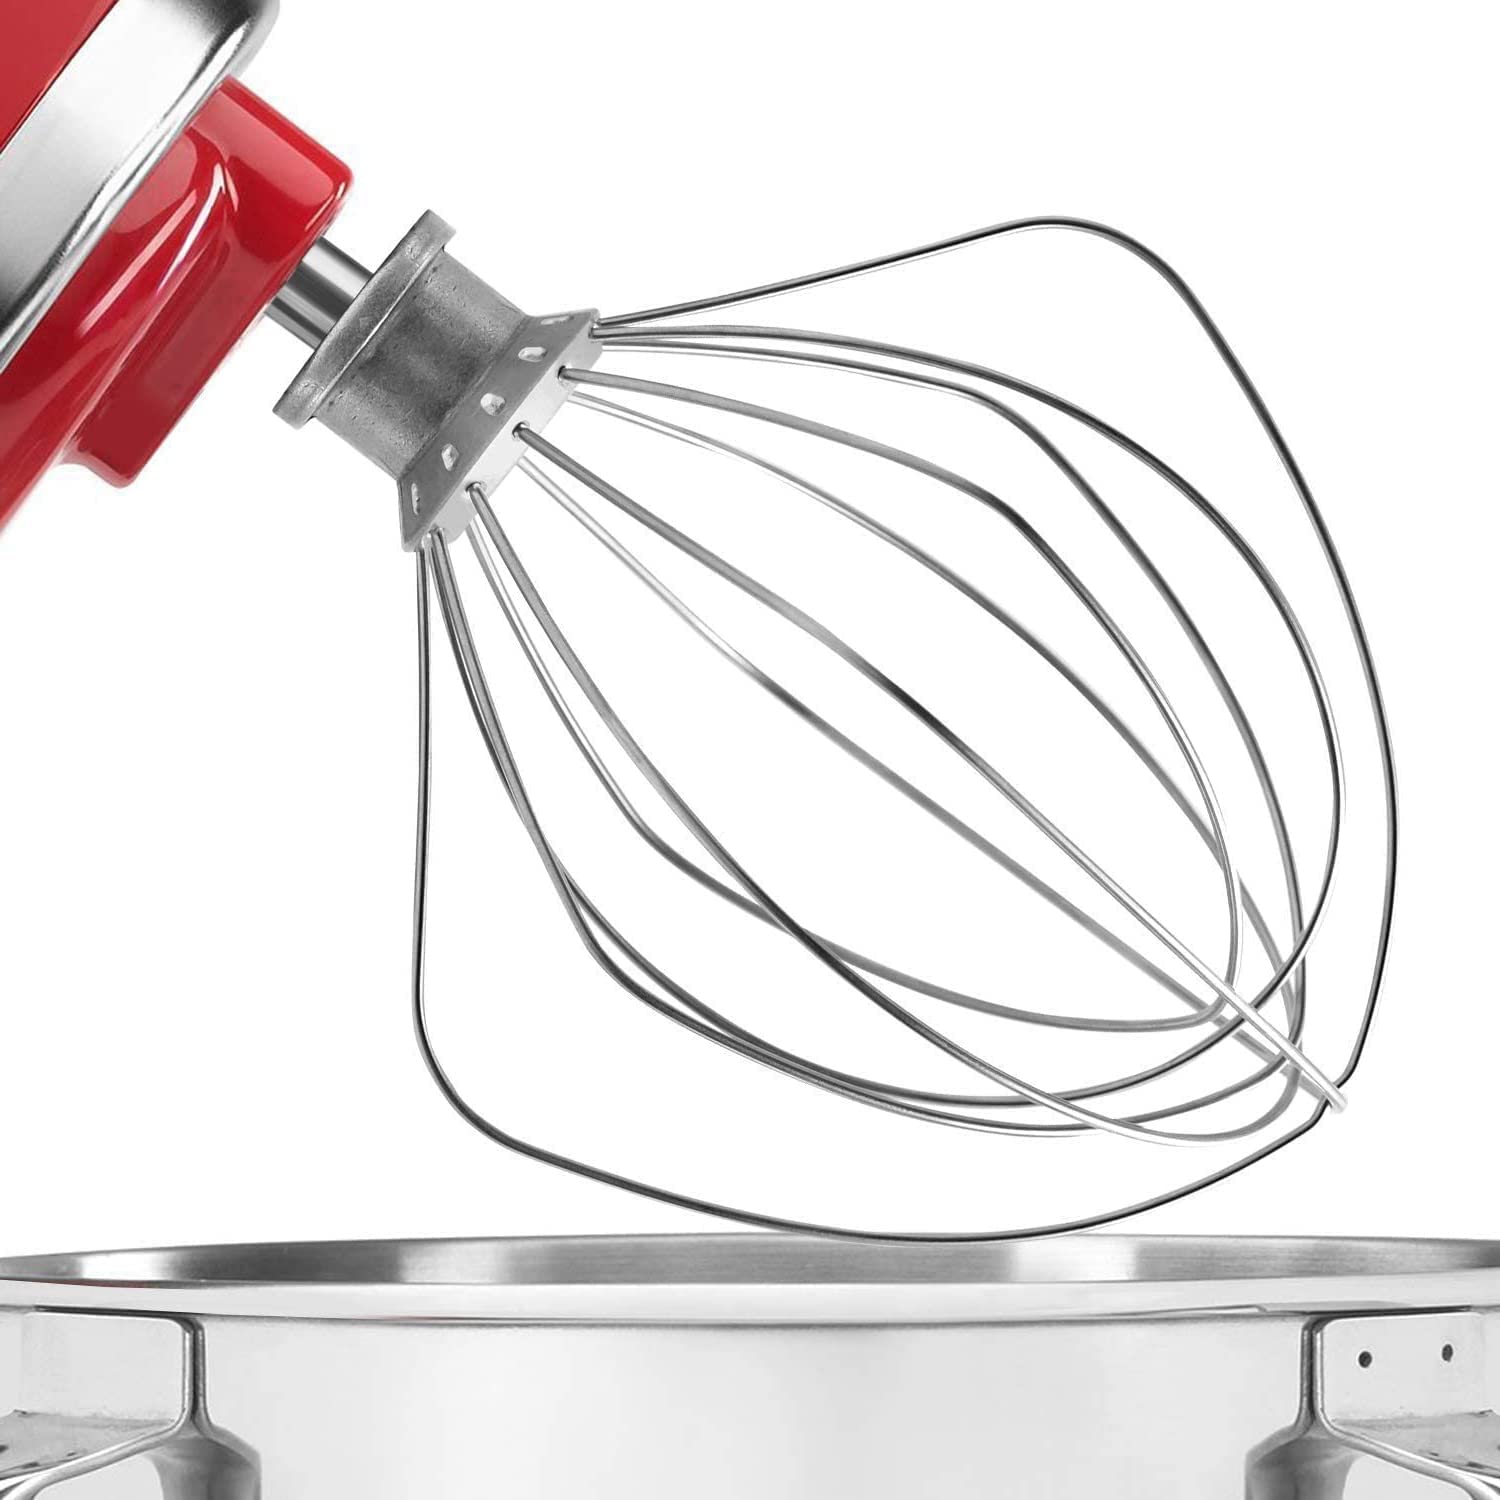 6 Wire Whisk Whip Beater 4.5Qt Mixer Attachment Stainless Steel